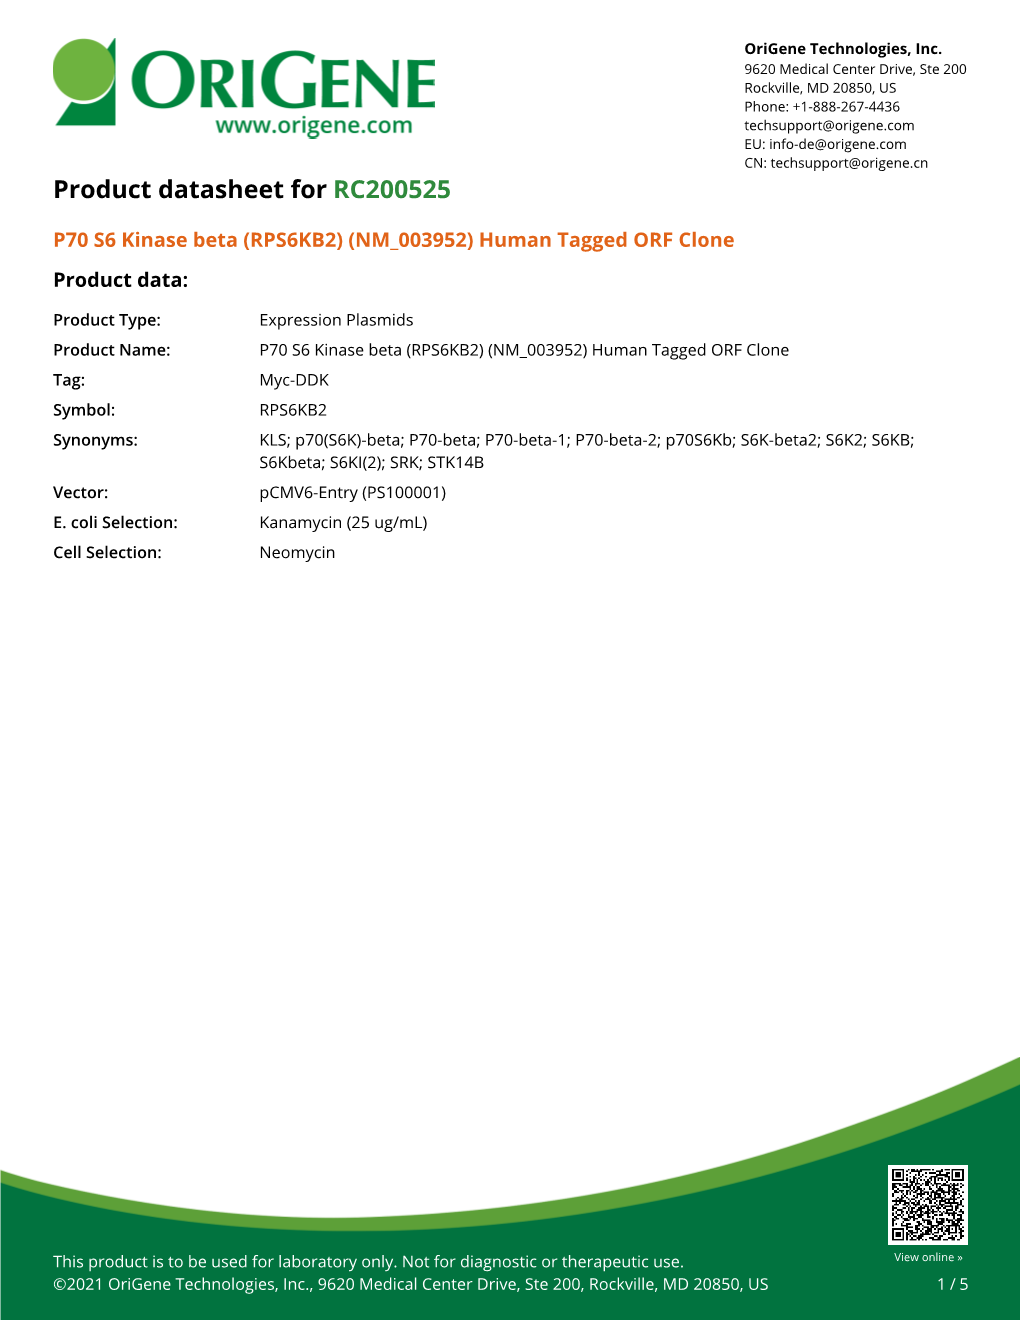 P70 S6 Kinase Beta (RPS6KB2) (NM 003952) Human Tagged ORF Clone Product Data